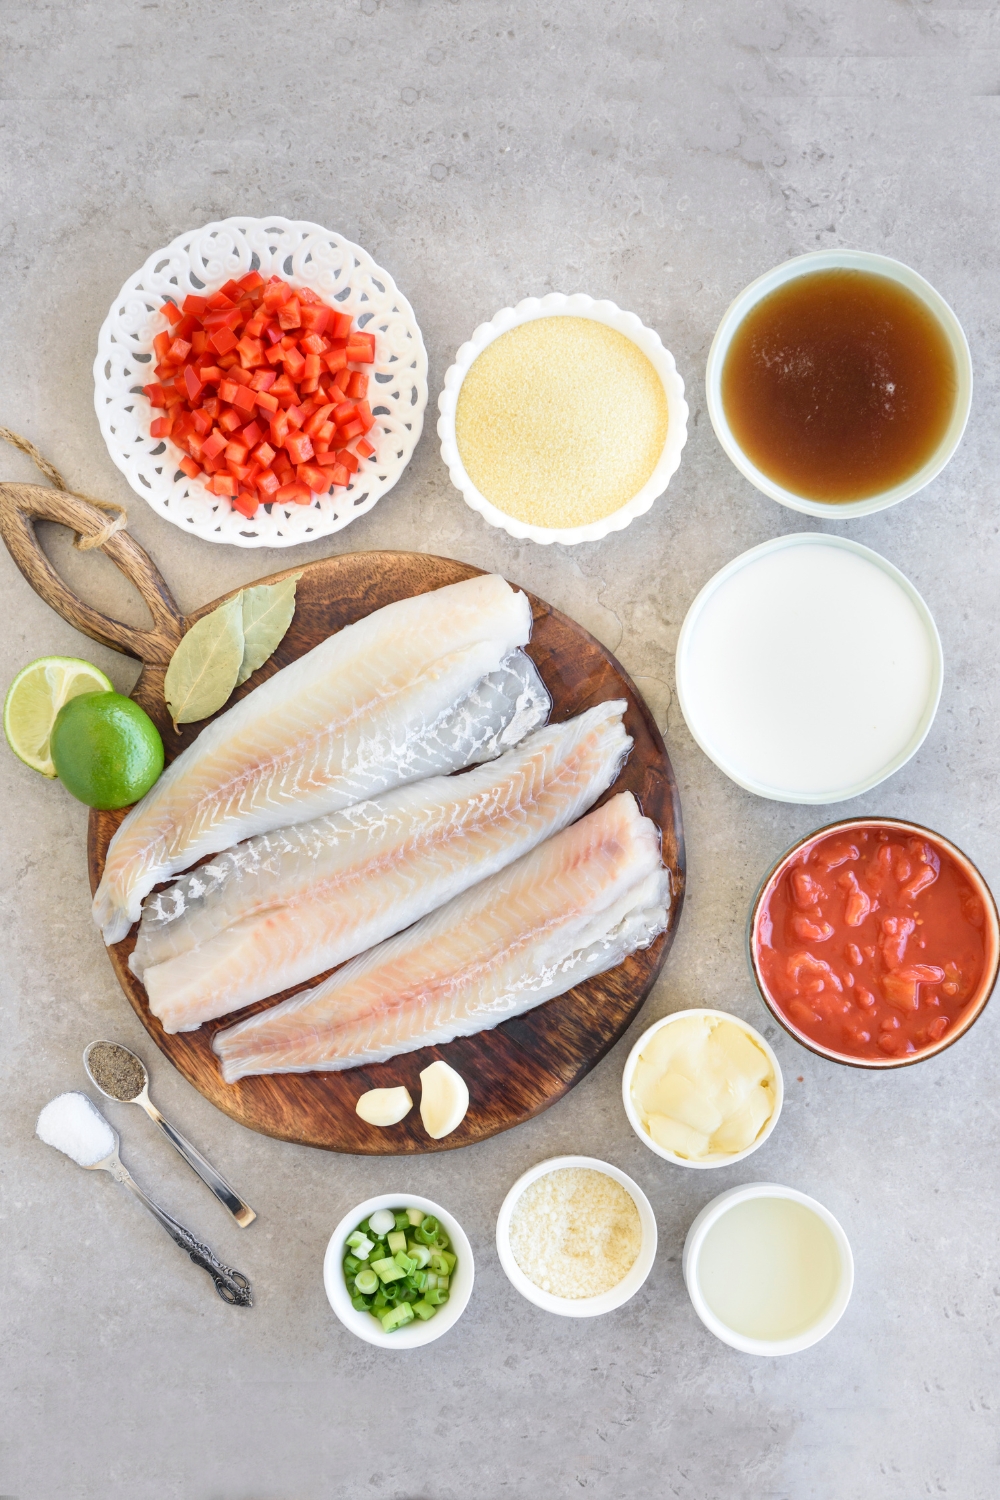 Diced pepper, parmesan cheese, vegetable stock, milk, chopped tomatoes, butter, grits, seasonings, green onion, pollock fillets, and limes are all in separate bowls on a gray counter.